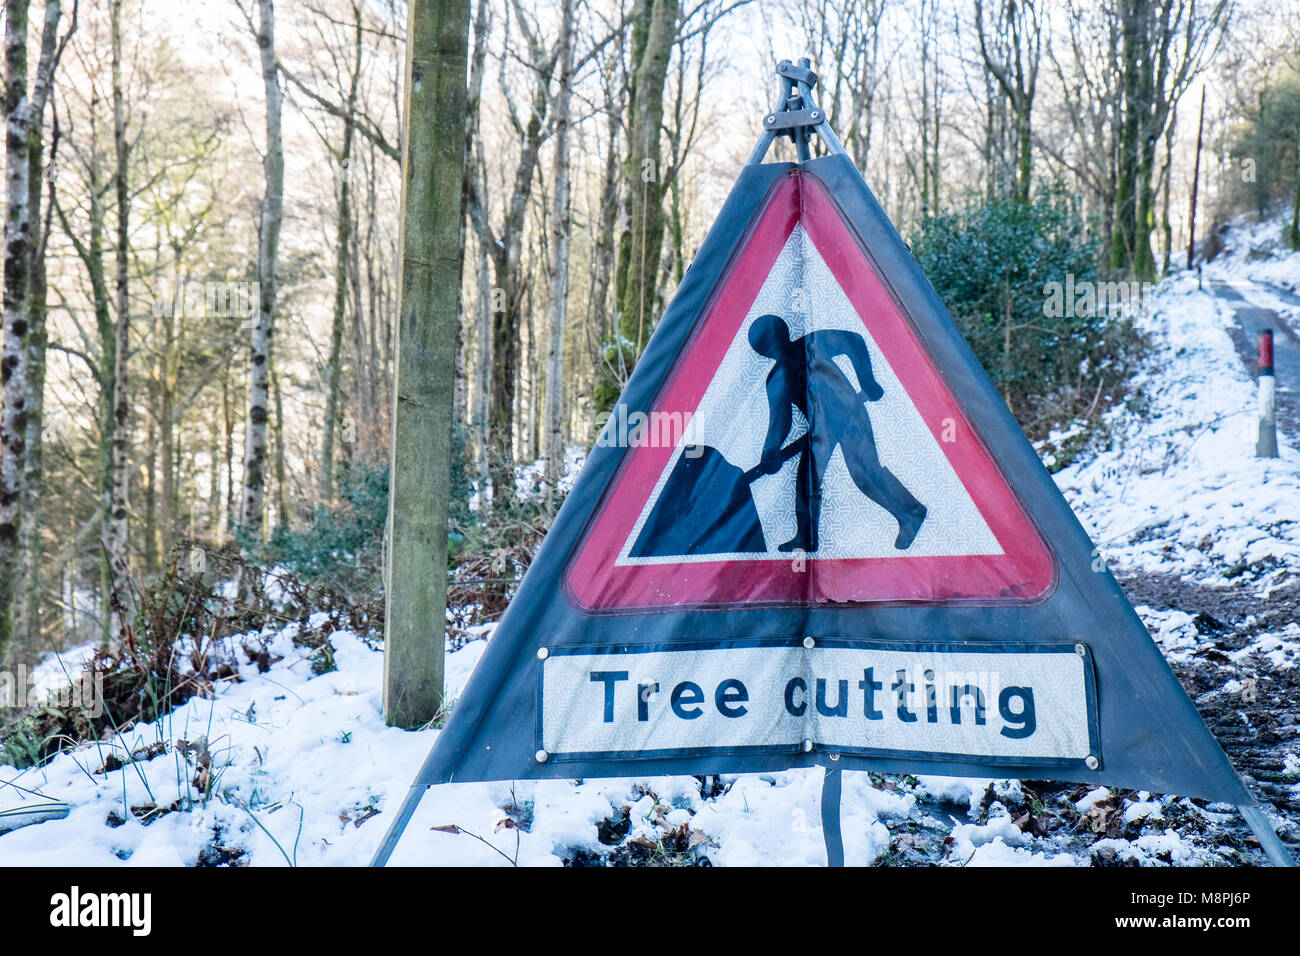 Tree cutting,sign,warning,notice,signage,in,forest,woods,while workers,remove,fallen,tree,near,Furnace,hamlet,Ceredigion,Mid,Wales,UK,U.K.,Europe, Stock Photo